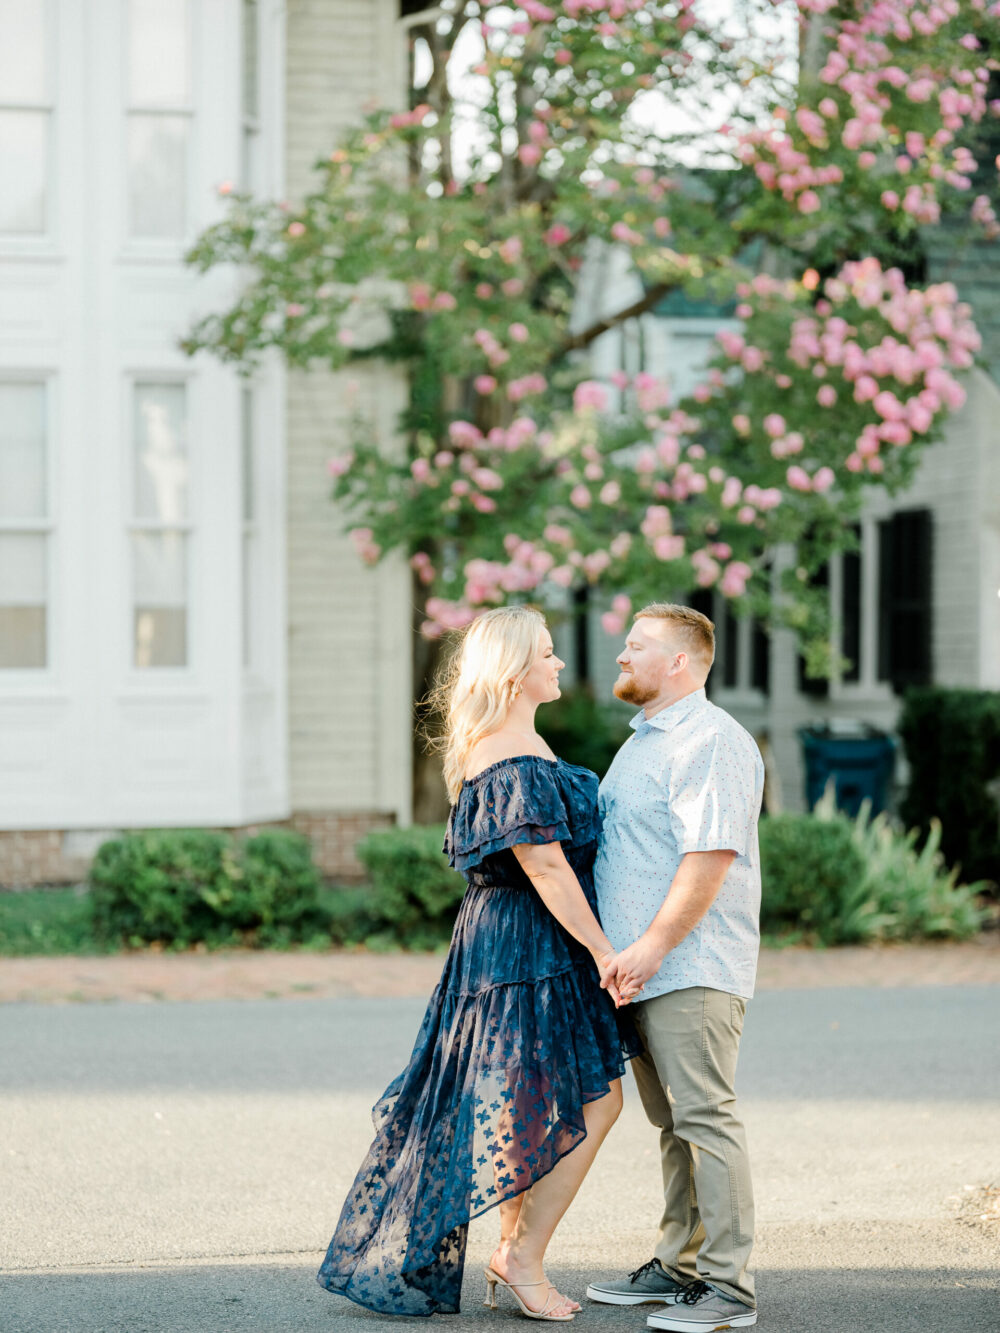 A stunning golden hour engagement session in Downtown St. Michael's in Easton, Maryland.